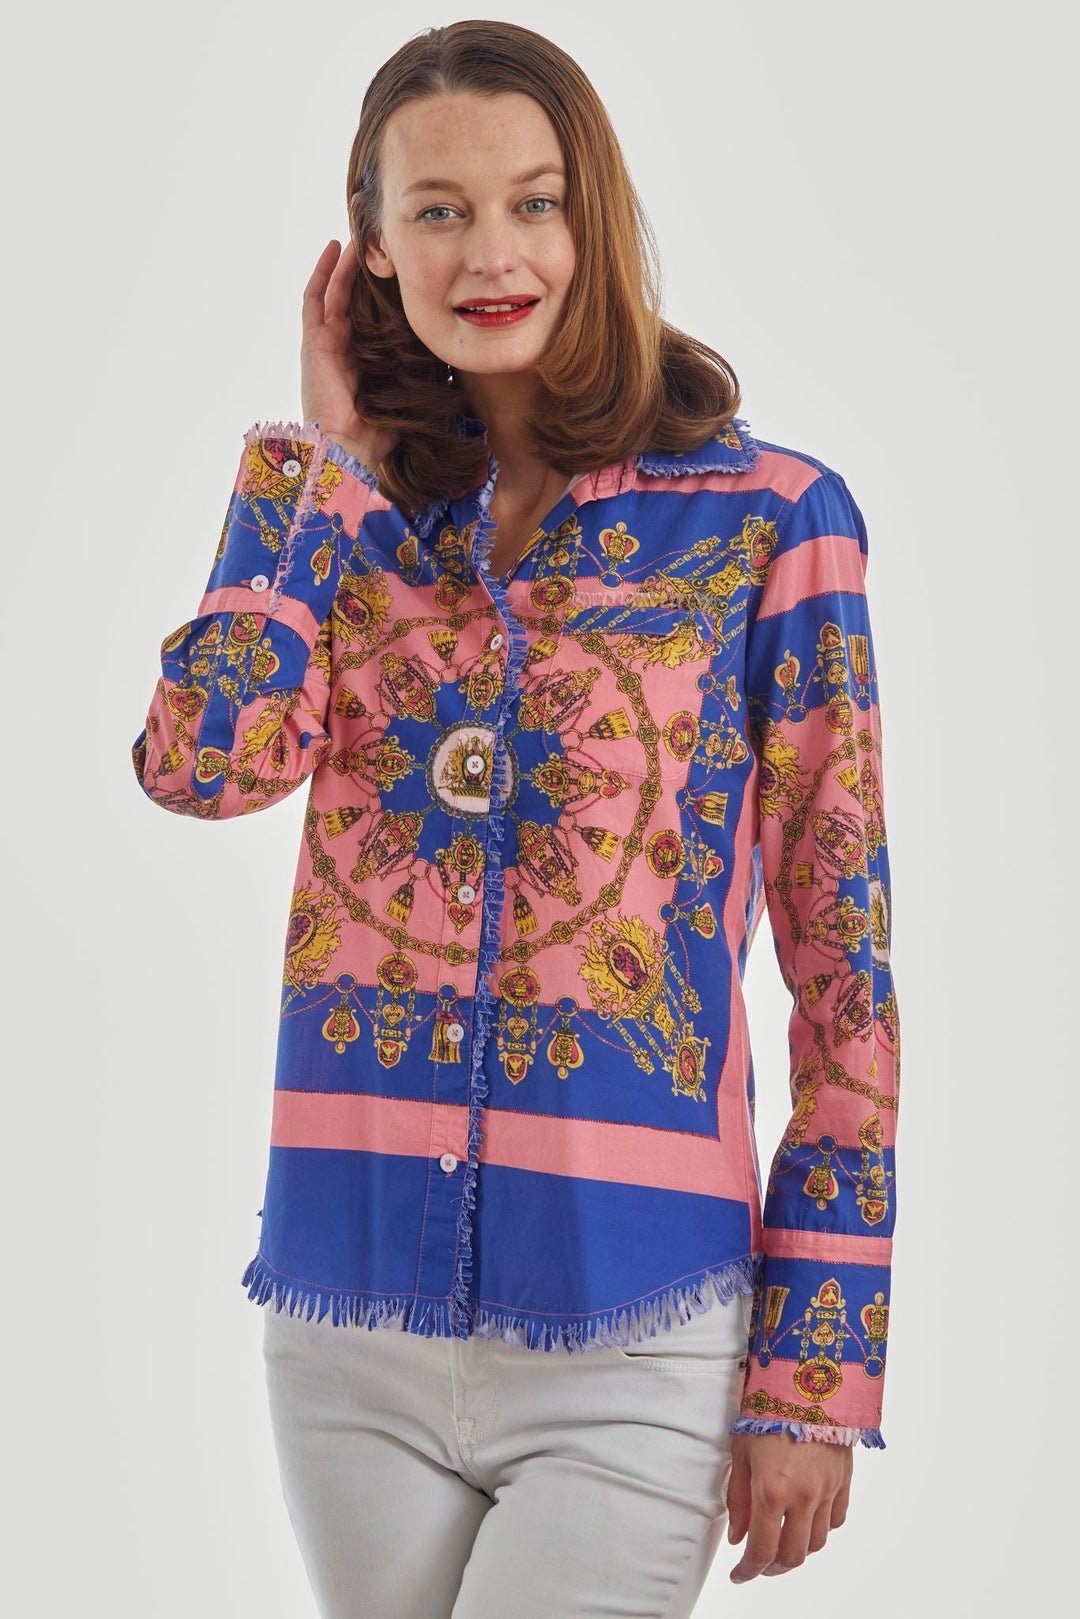 Dizzy Lizzie Cape Cod Tunic Navy Pink with Gold Engineered